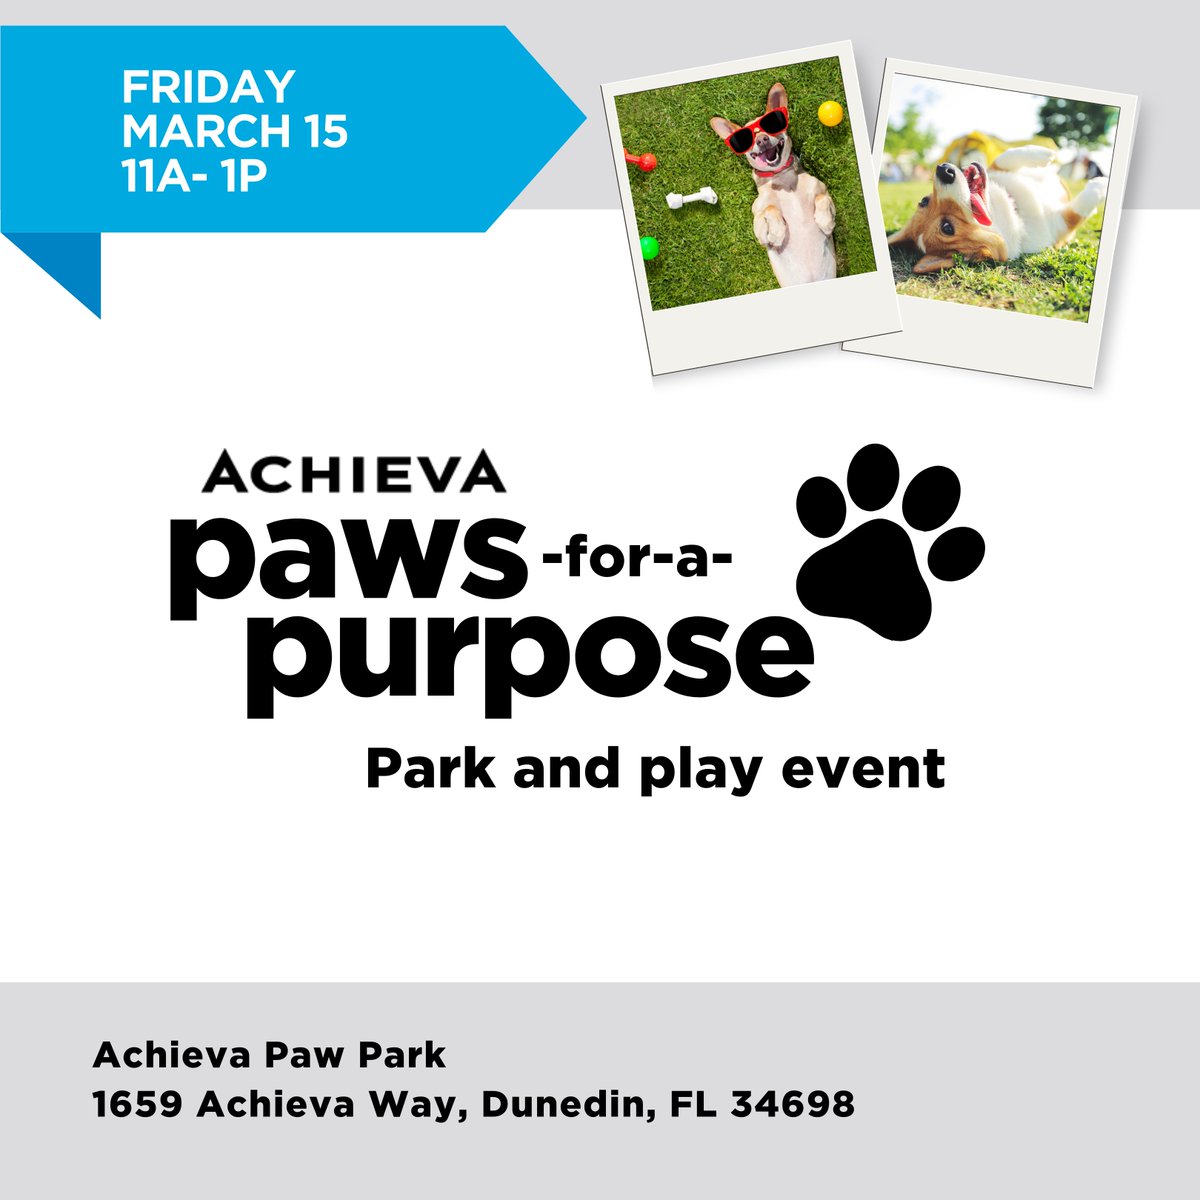 Join us for our special event in partnership with @FeedingTampaBay to support local pets in need! Bring a donation of unopened dog food to Achieva Paw Park on March 15 from 11a to 1pm. Save the date. 📅 We look forward to seeing you there.